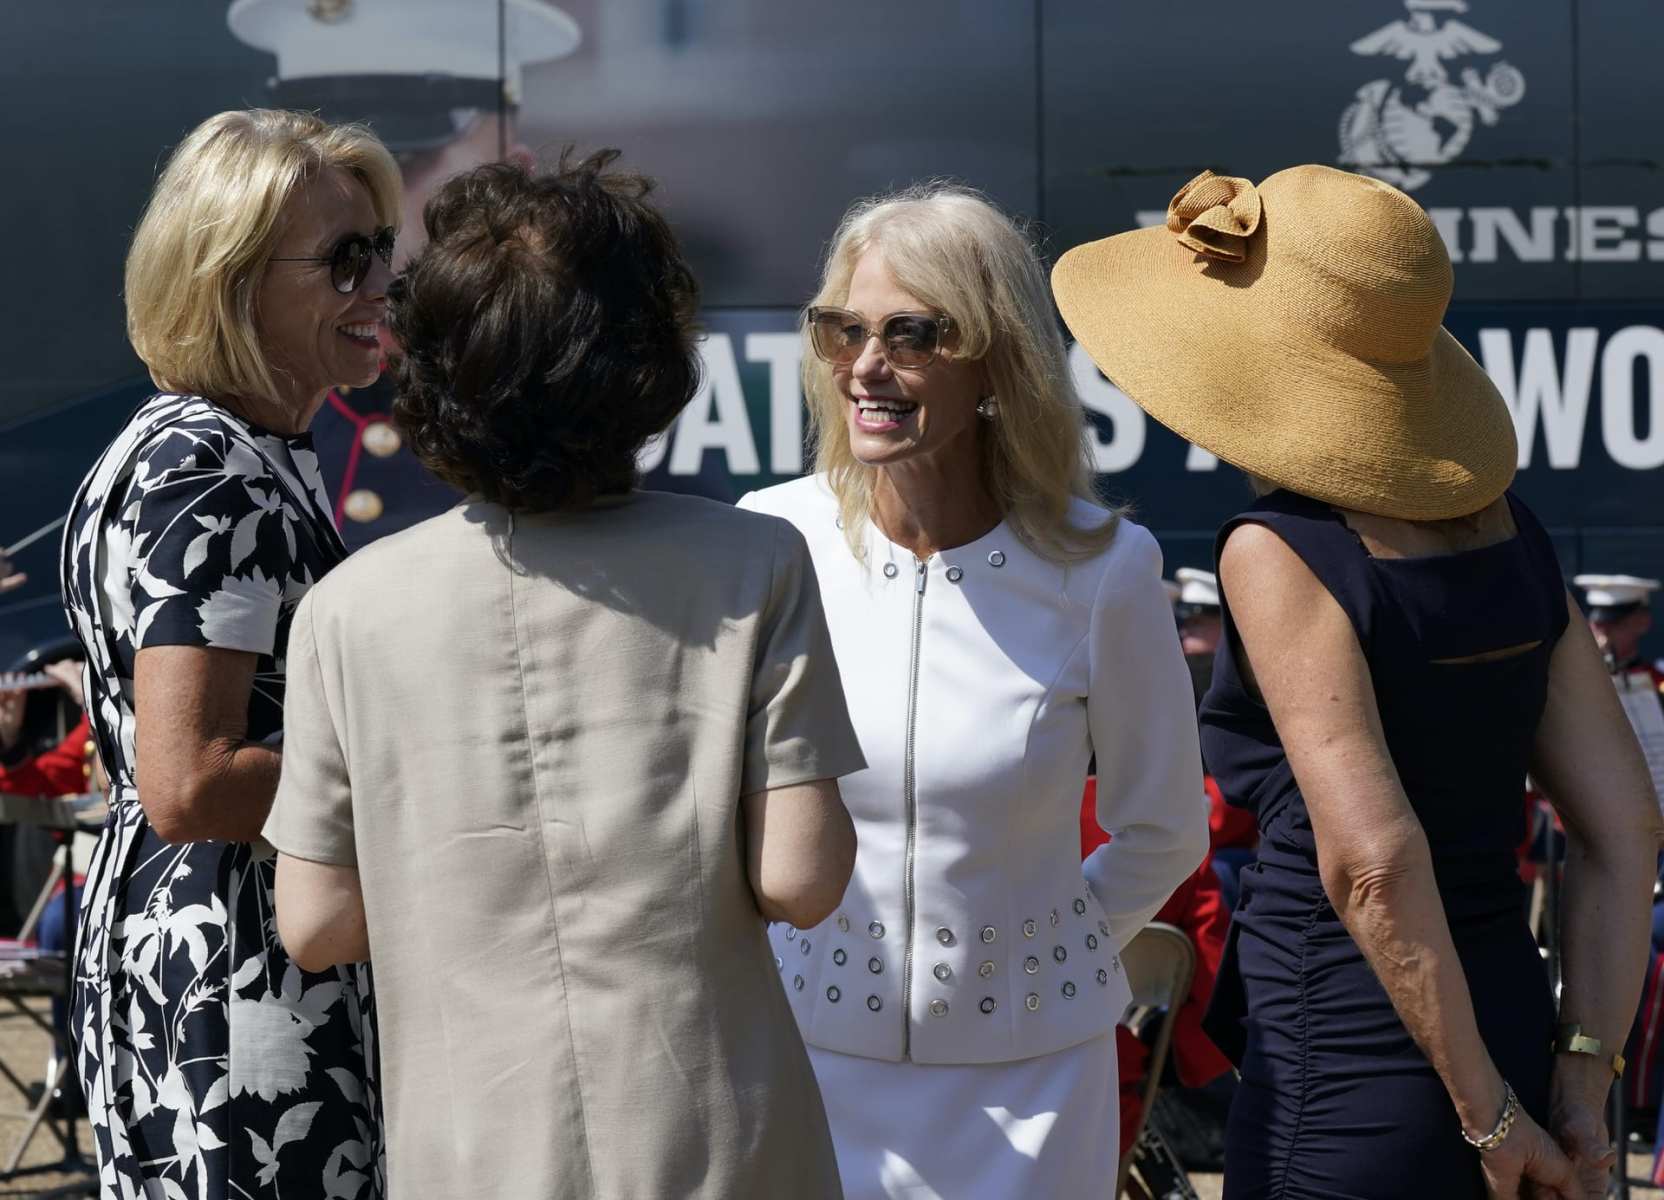 Kellyanne Conway, one of President Donald Trump's most influential and longest serving advisers, speaks with Education Secretary Betsy Devos, left, and Transportation Secretary Elaine Chao, second from left, at an event with First Lady Melania Trump, in front of the White House in Washington, Monday, Aug. 24, 2020. Conway announced Sunday that she would be leaving the White House at the end of the month, citing a need to spend time with her four children. (AP Photo/J. Scott Applewhite)